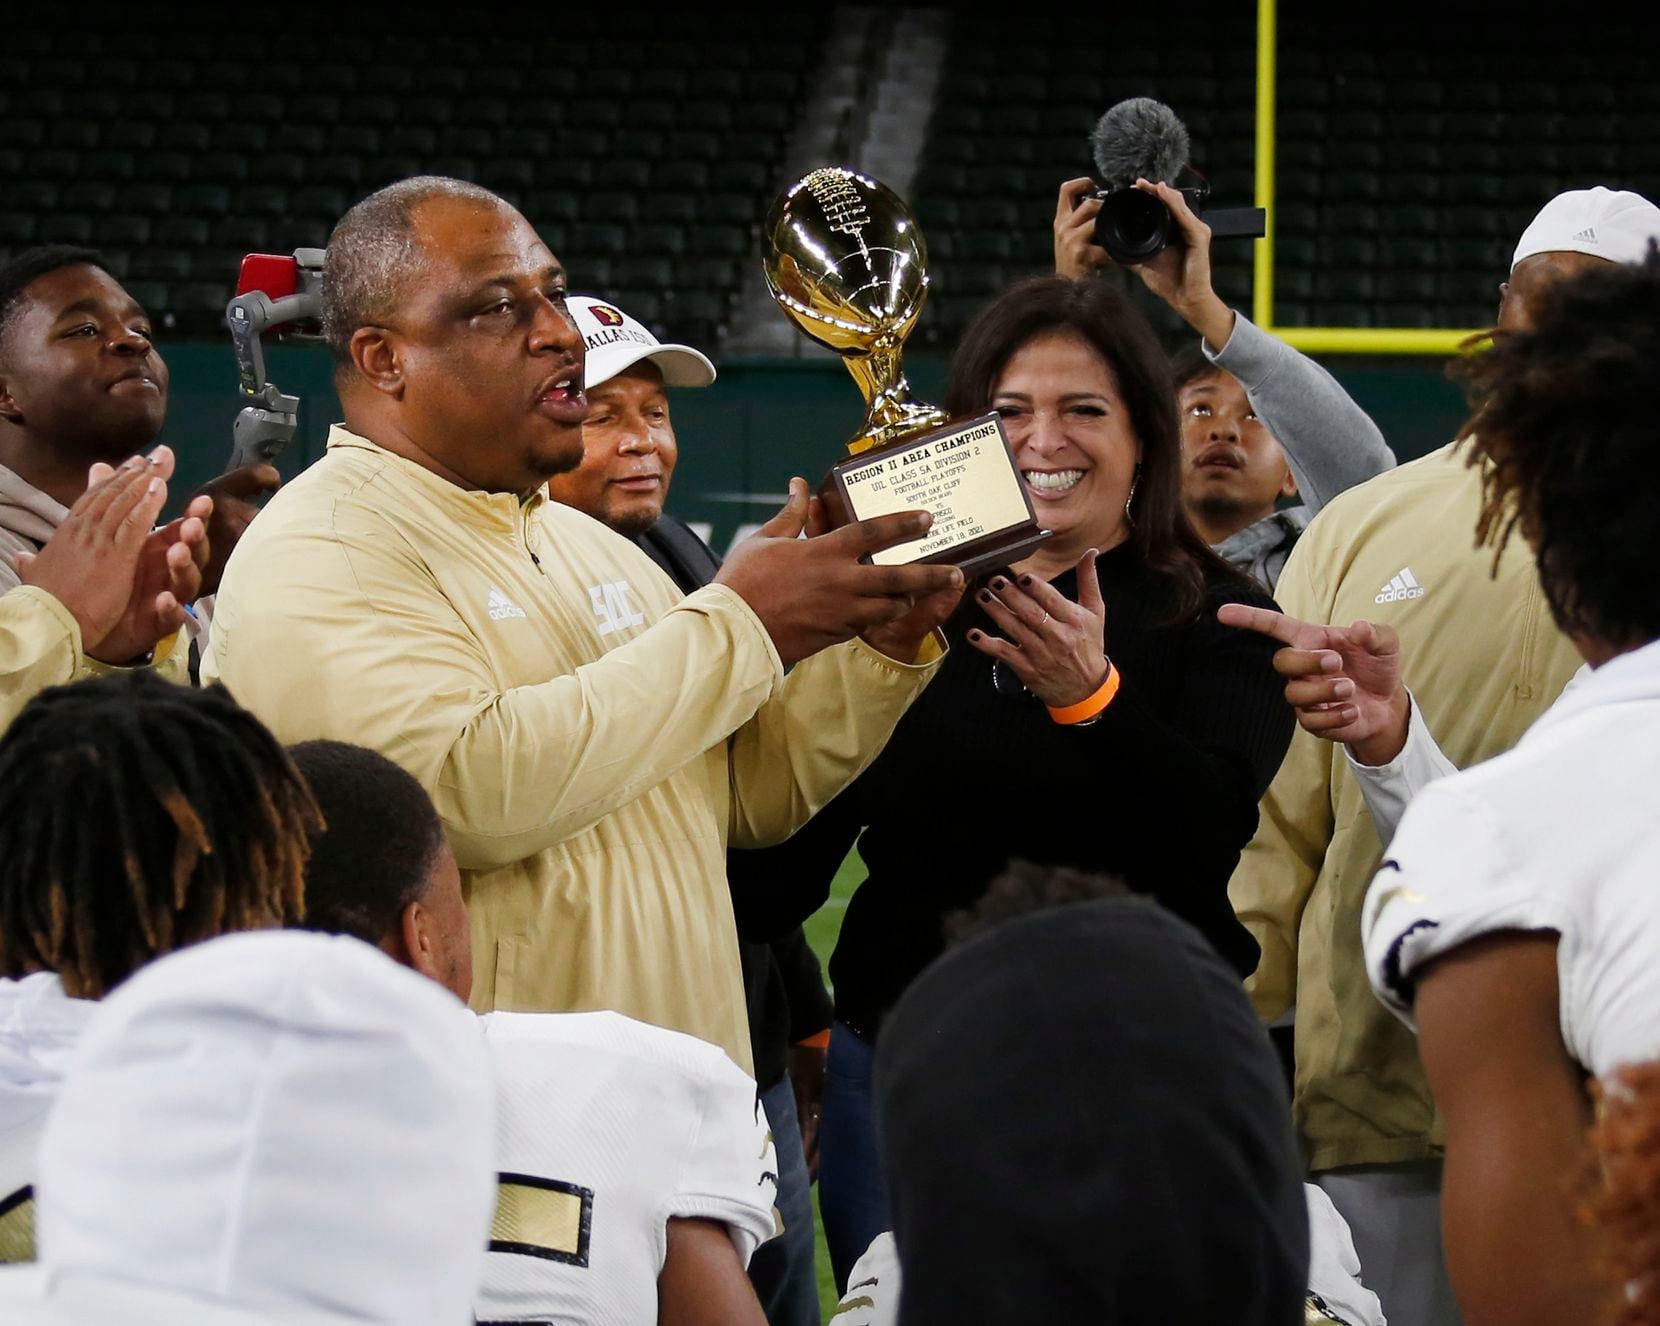 South Oak Cliff head coach Jason Todd raises the Region ll Area Champions trophy after presented by Dallas ISD Athletics Director Dr. Sylvia Salinas. The Golden Bears of South Oak Cliff defeated Frisco 35-24 to advance. The two teams played their Class 5A Division ll area-round playoff football game at Globe Life Field in  Arlington on November 18, 2021. (Steve Hamm/ Special Contributor)